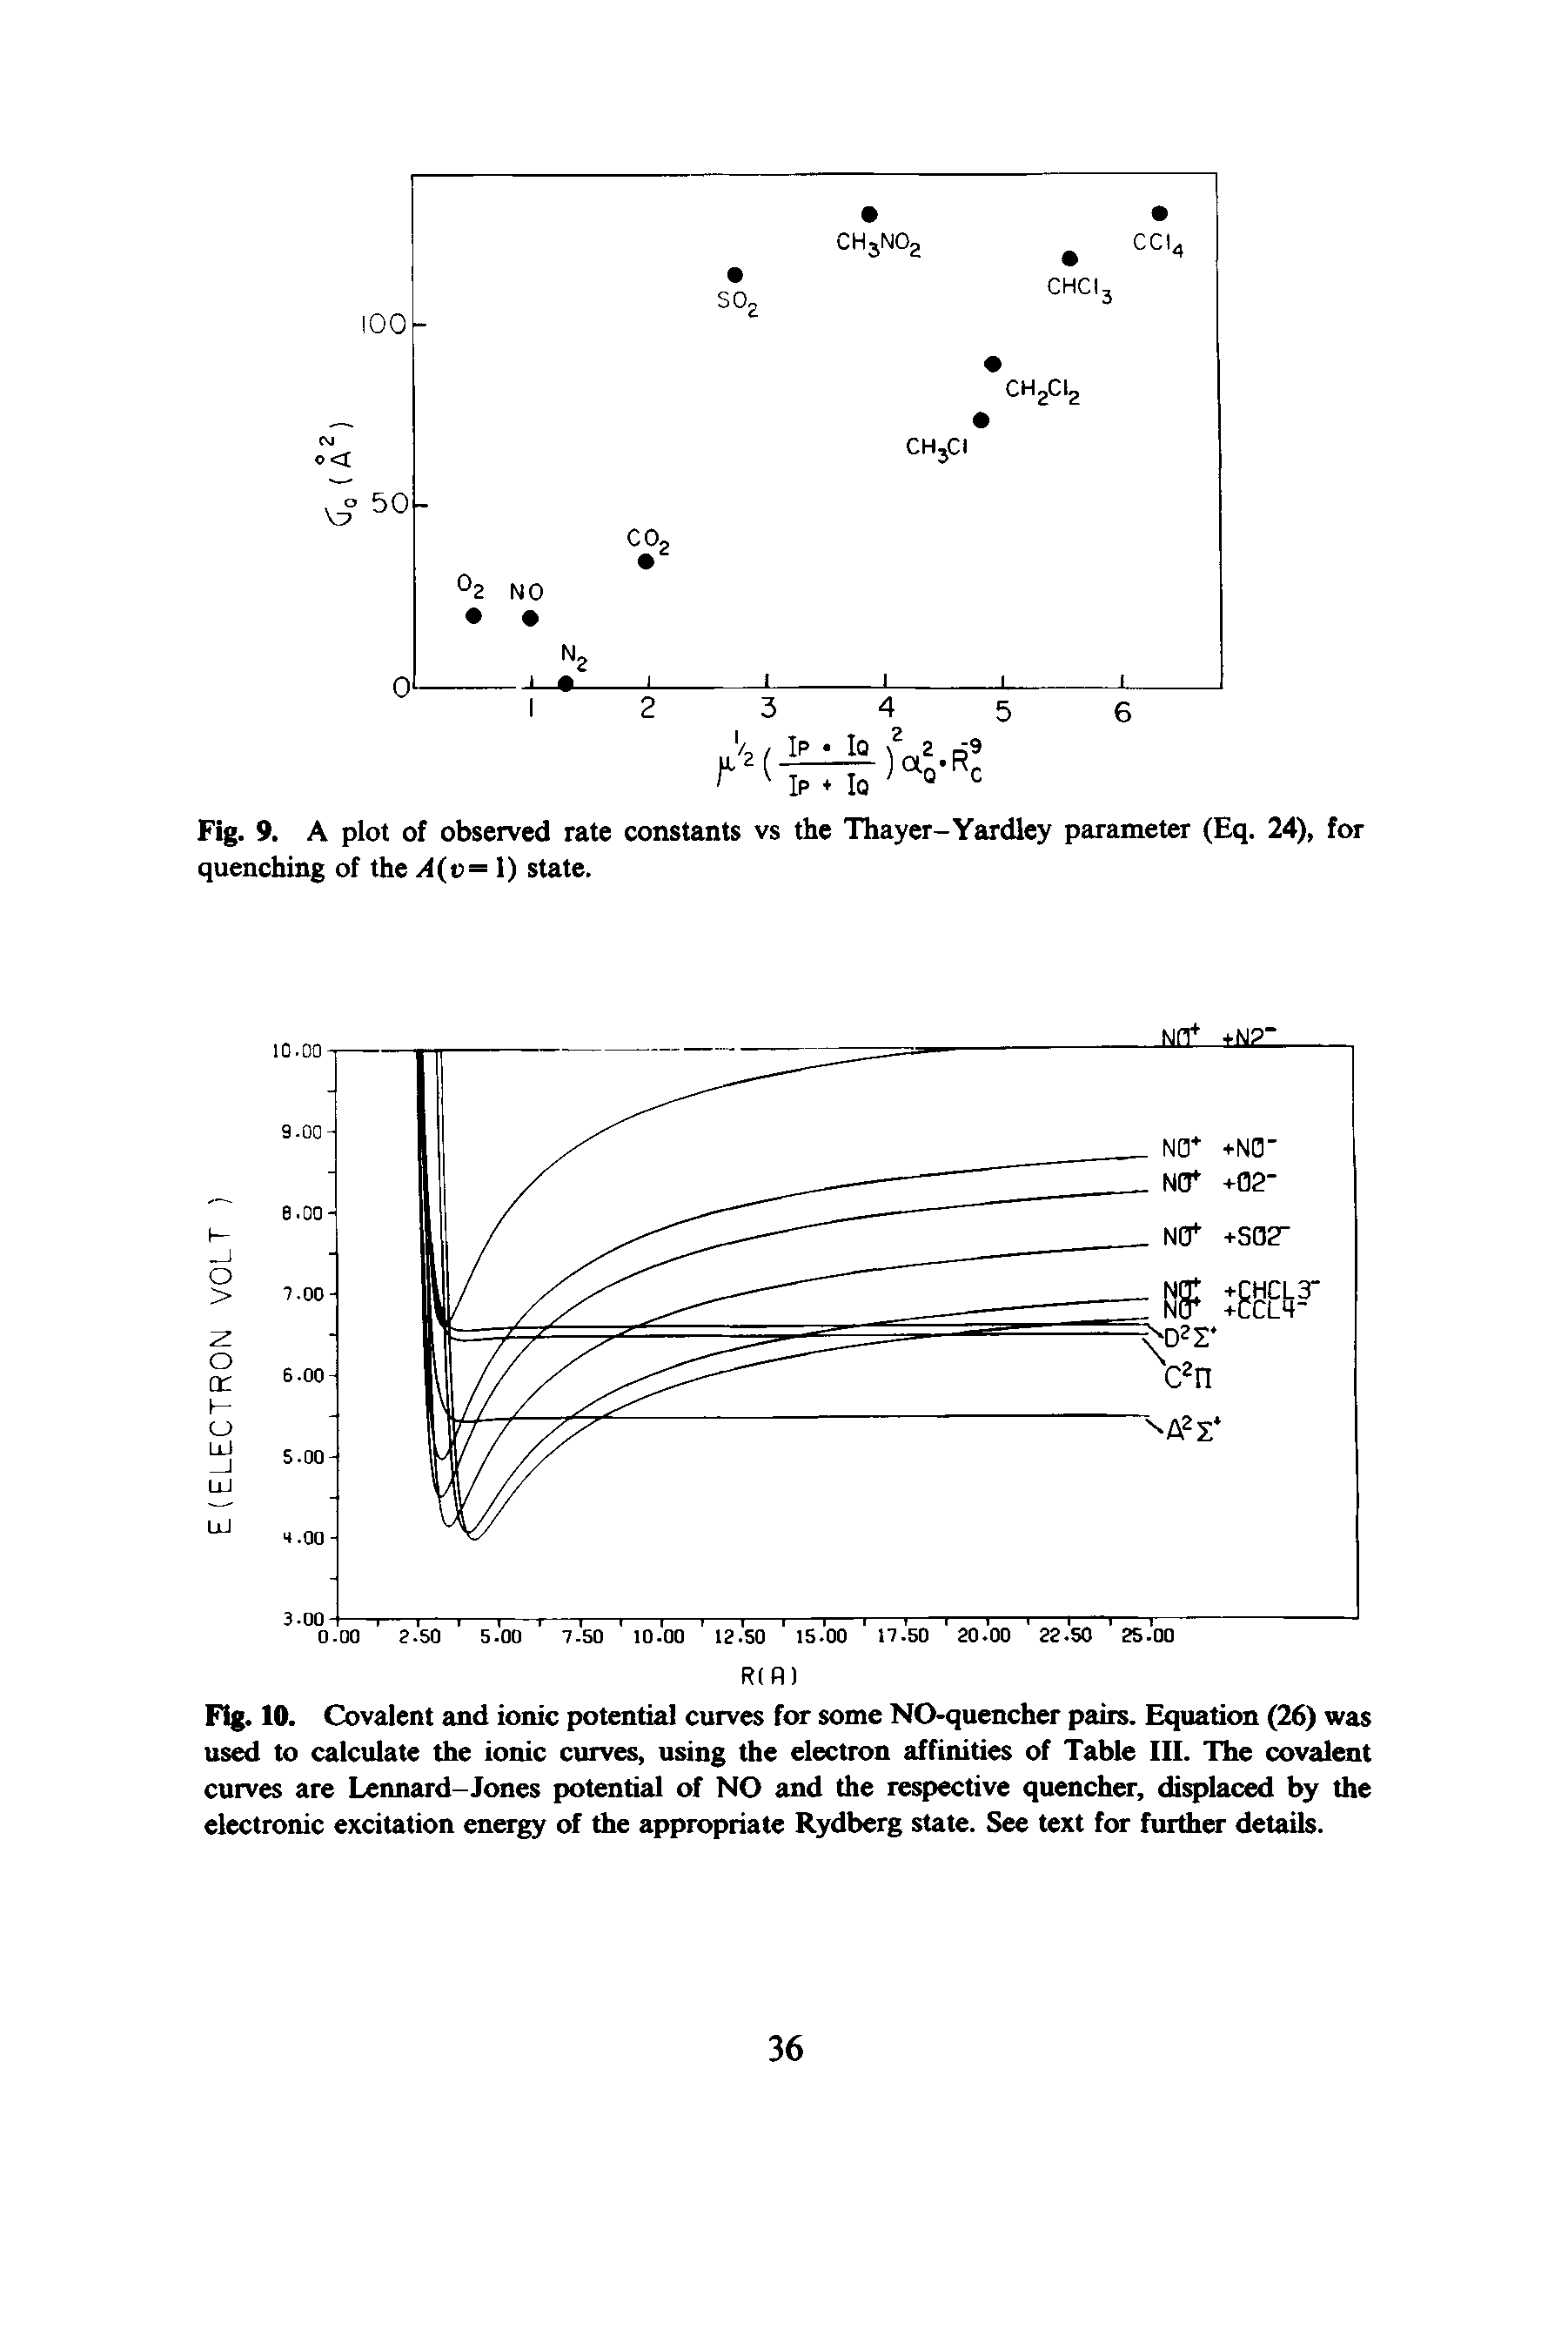 Fig. 10. Covalent and ionic potential curves for some NO-quencher pairs. Equation (26) was used to calculate the ionic curves, using the electron affinities of Table III. The covalent curves are Leonard-Jones potential of NO and the respective quencher, displaced by the electronic excitation energy of the appropriate Rydberg state. See text for further details.